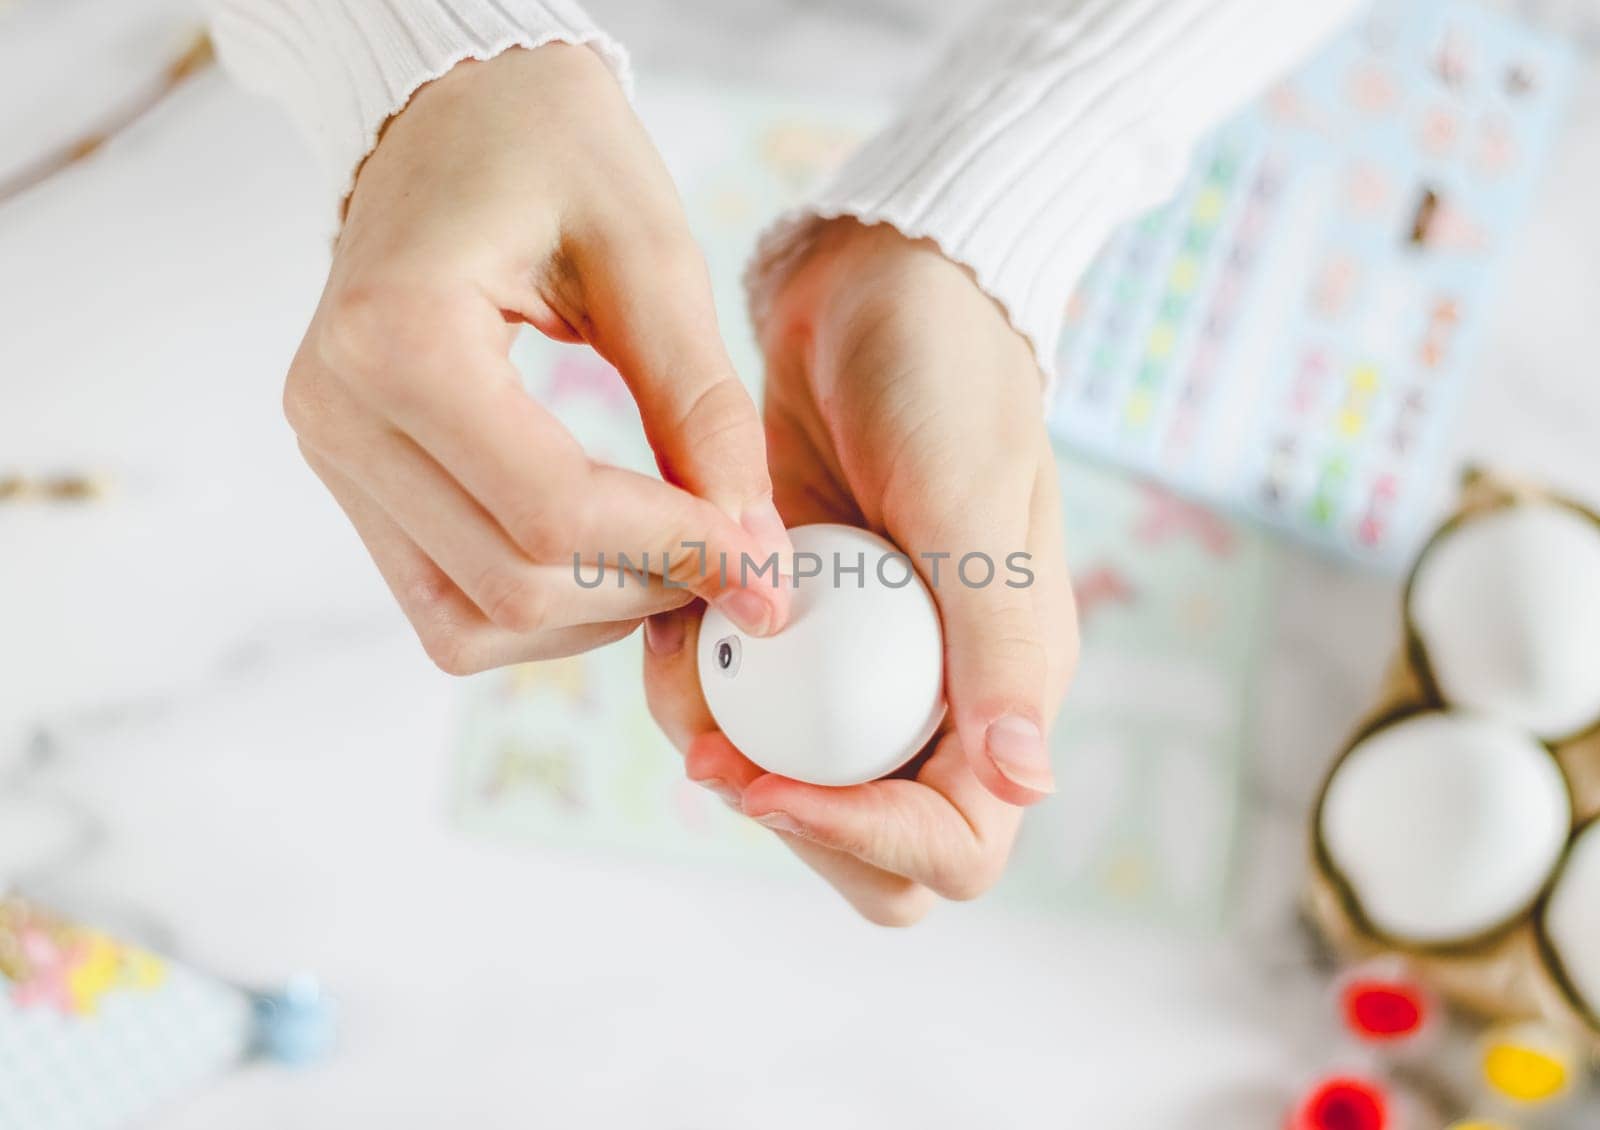 Children's hands of a caucasian teenager girl in a white turtleneck hold one white egg and stick adhesive decorative eyes, sit at a marble table with tassels, prepare crafts for the Easter holiday, flat lay close-up. Craft concept, handicraft, at home, children art, diy.